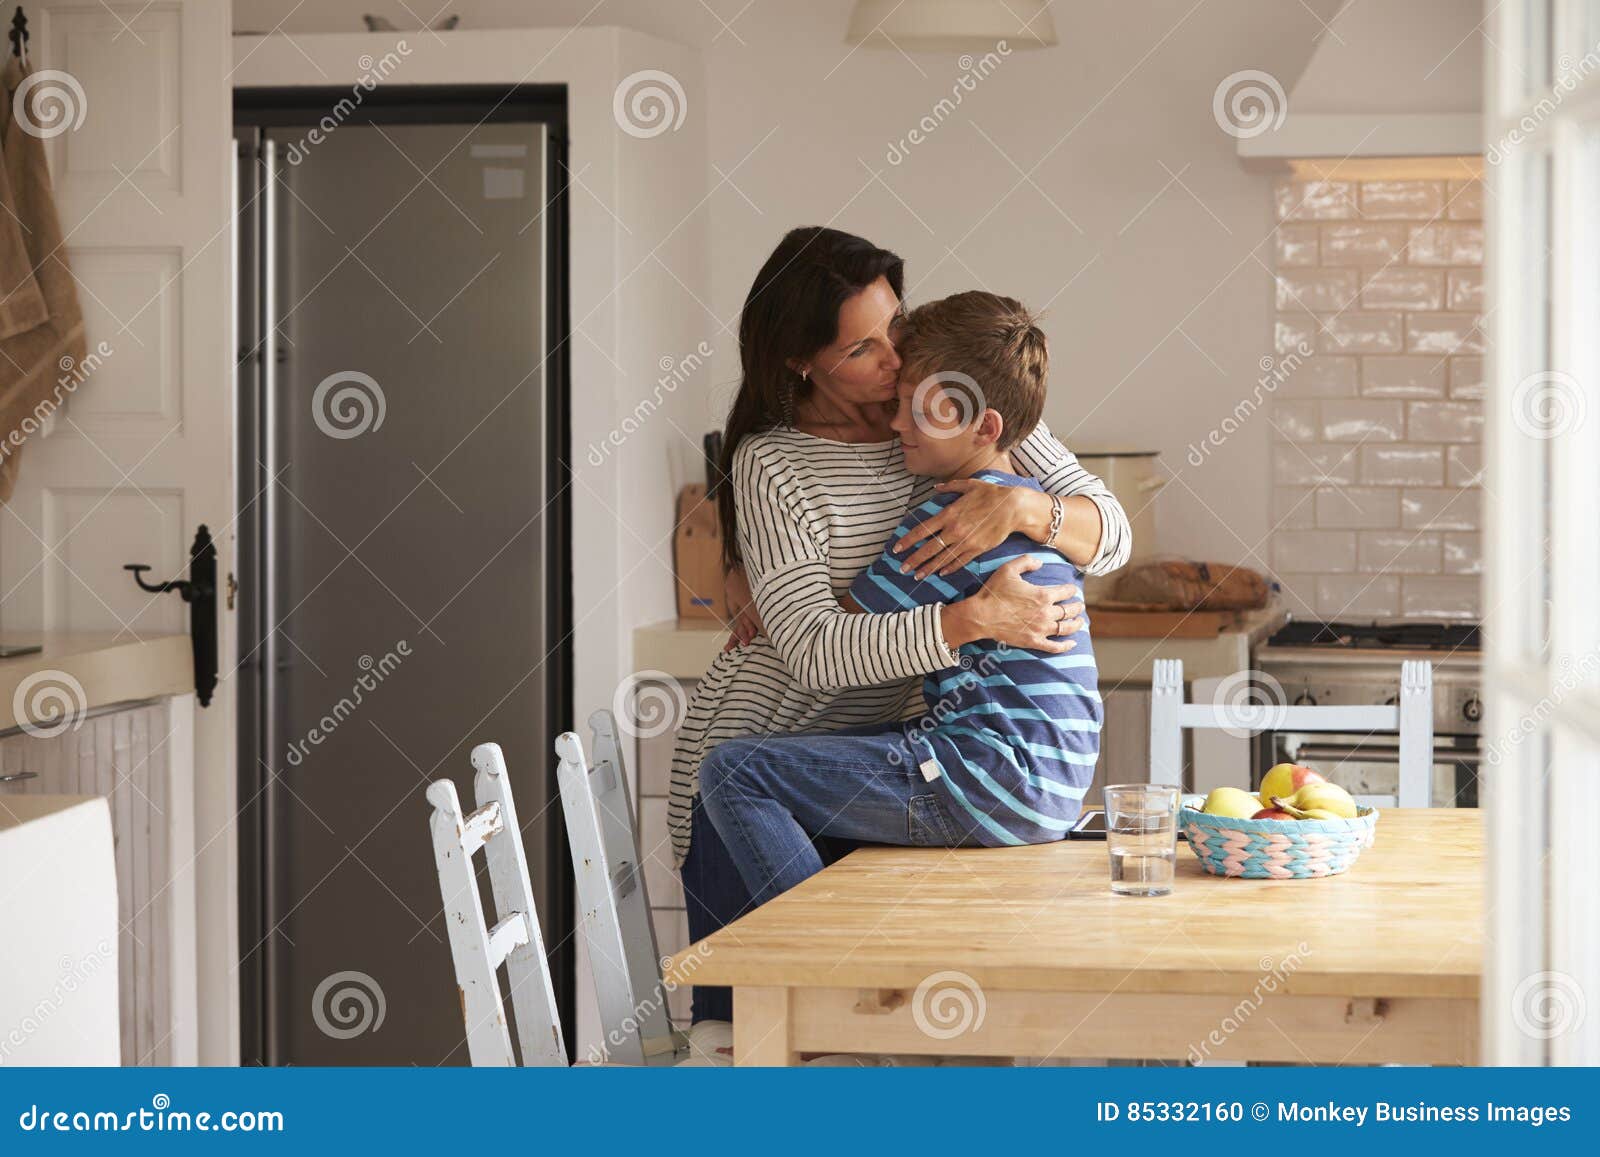 mom and son kitchen romance